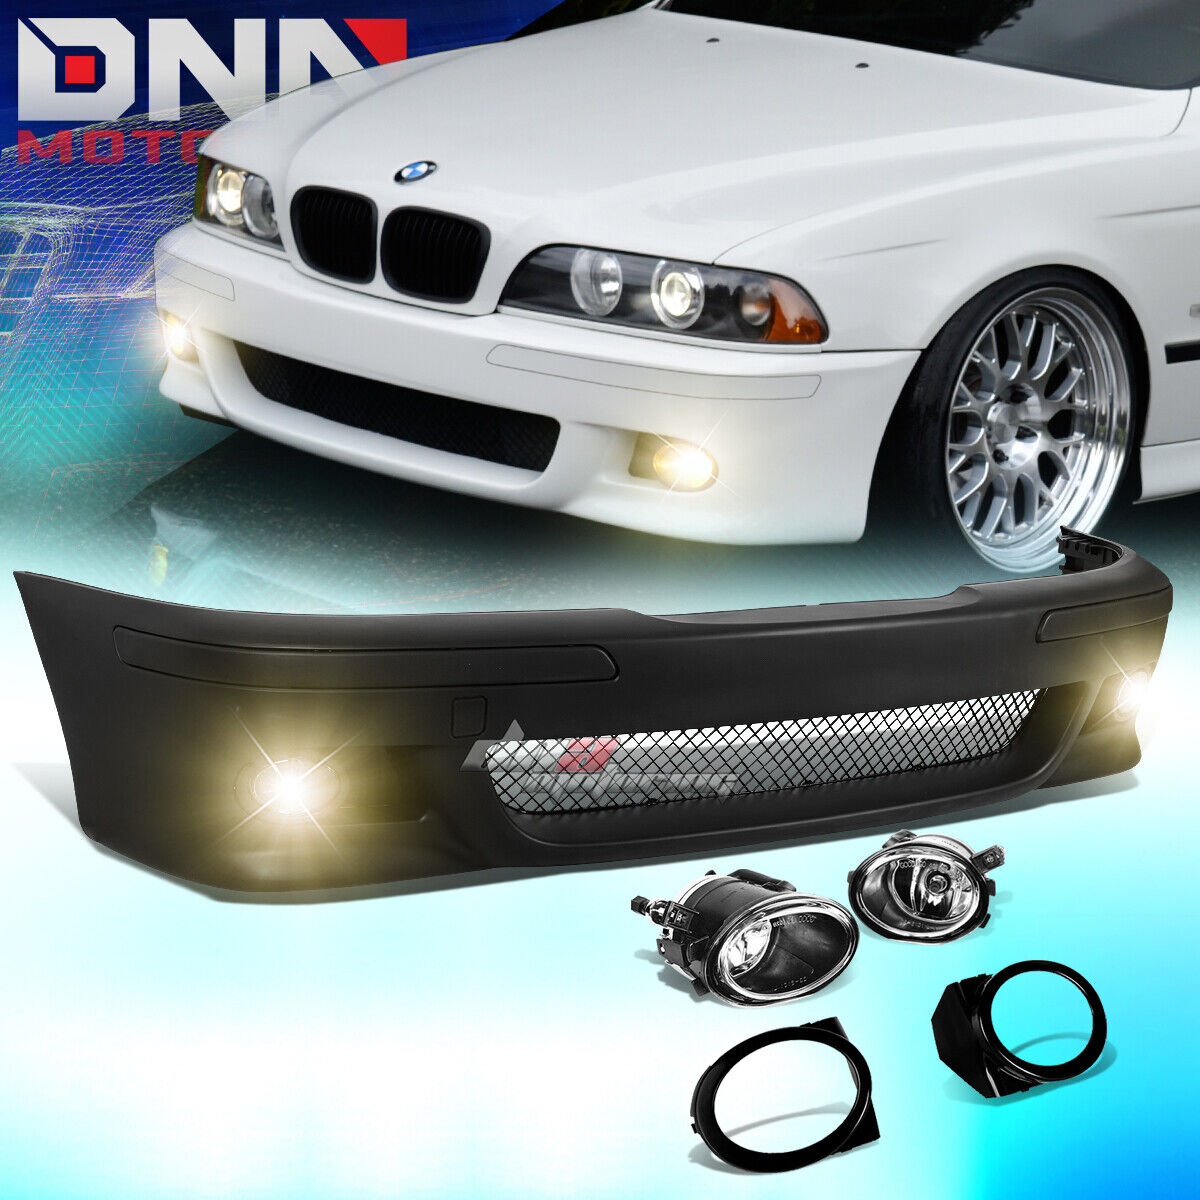 FOR 96-03 BMW E39 5SERIES M5 STYLE ABS FRONT BUMPER COVER BODY KIT+FOG LIGHT